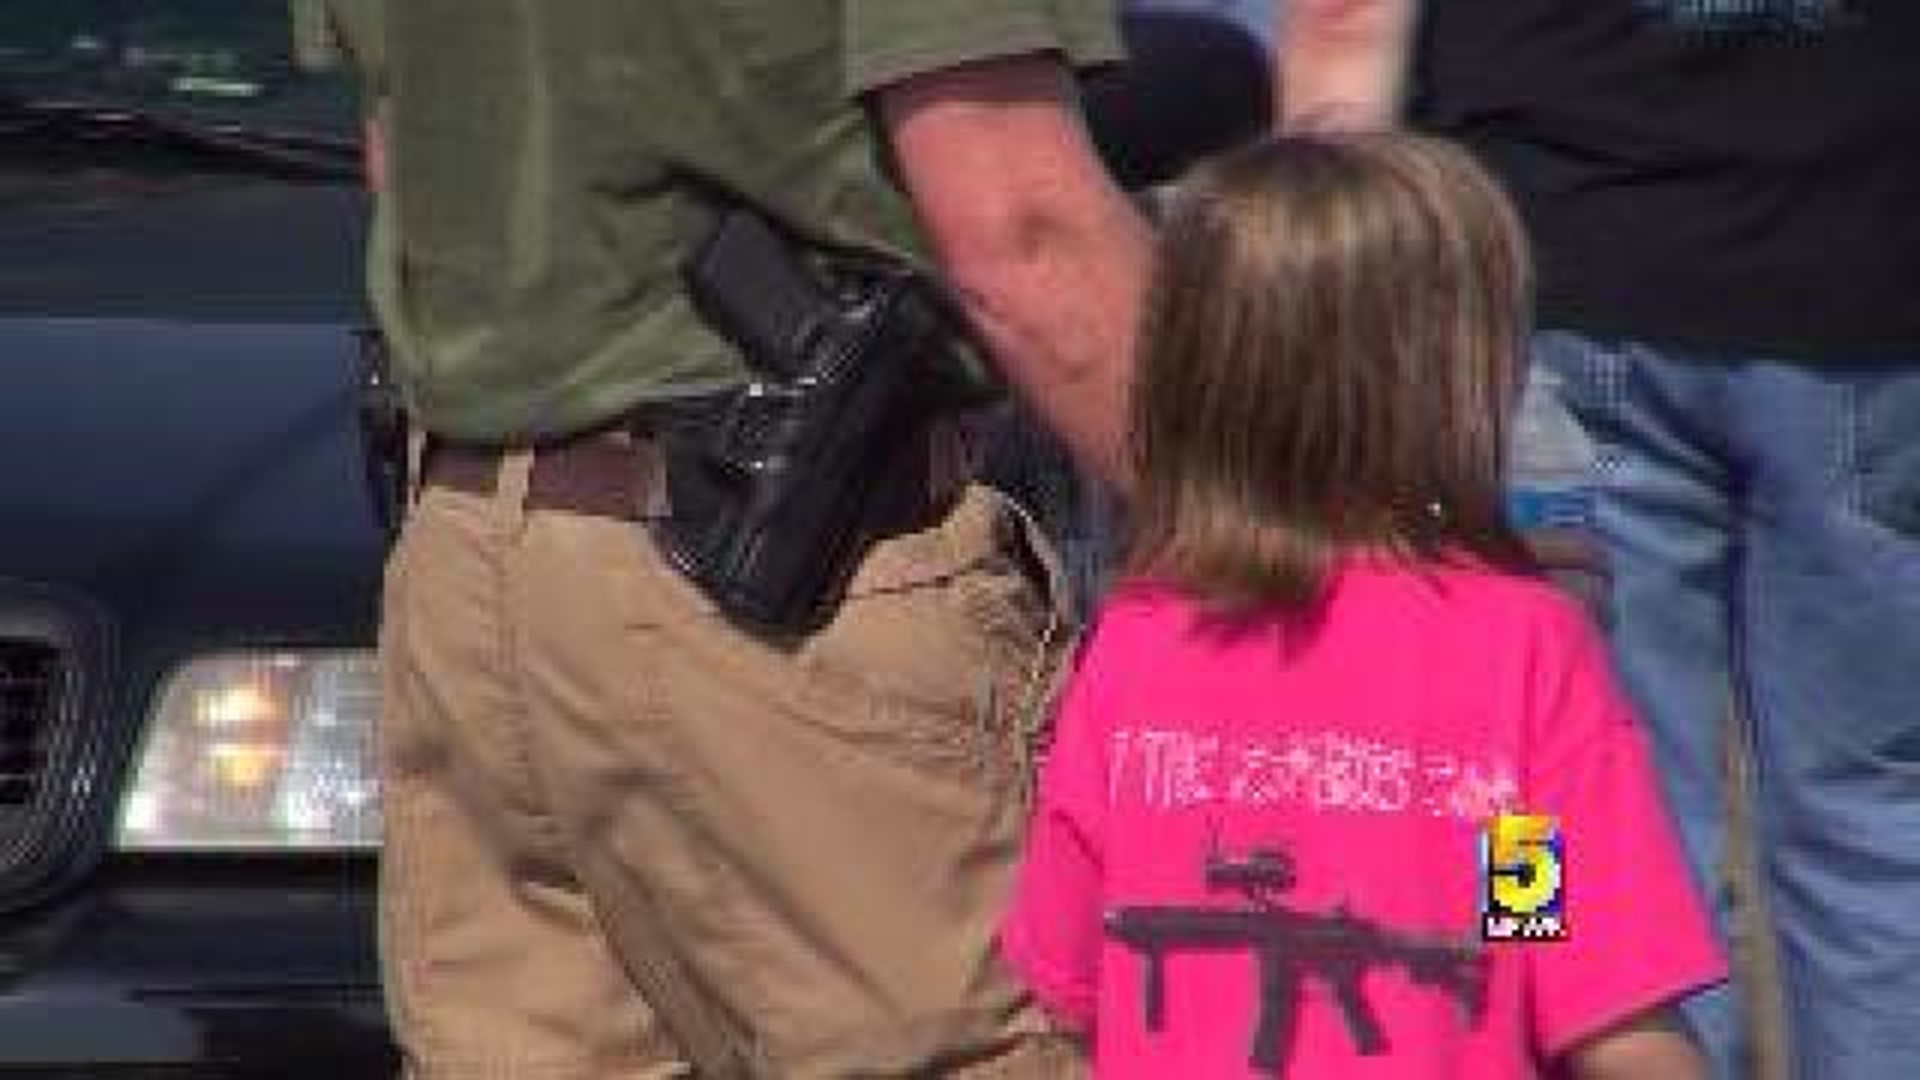 Gun-Rights Advocates March to Celebrate Open-Carry